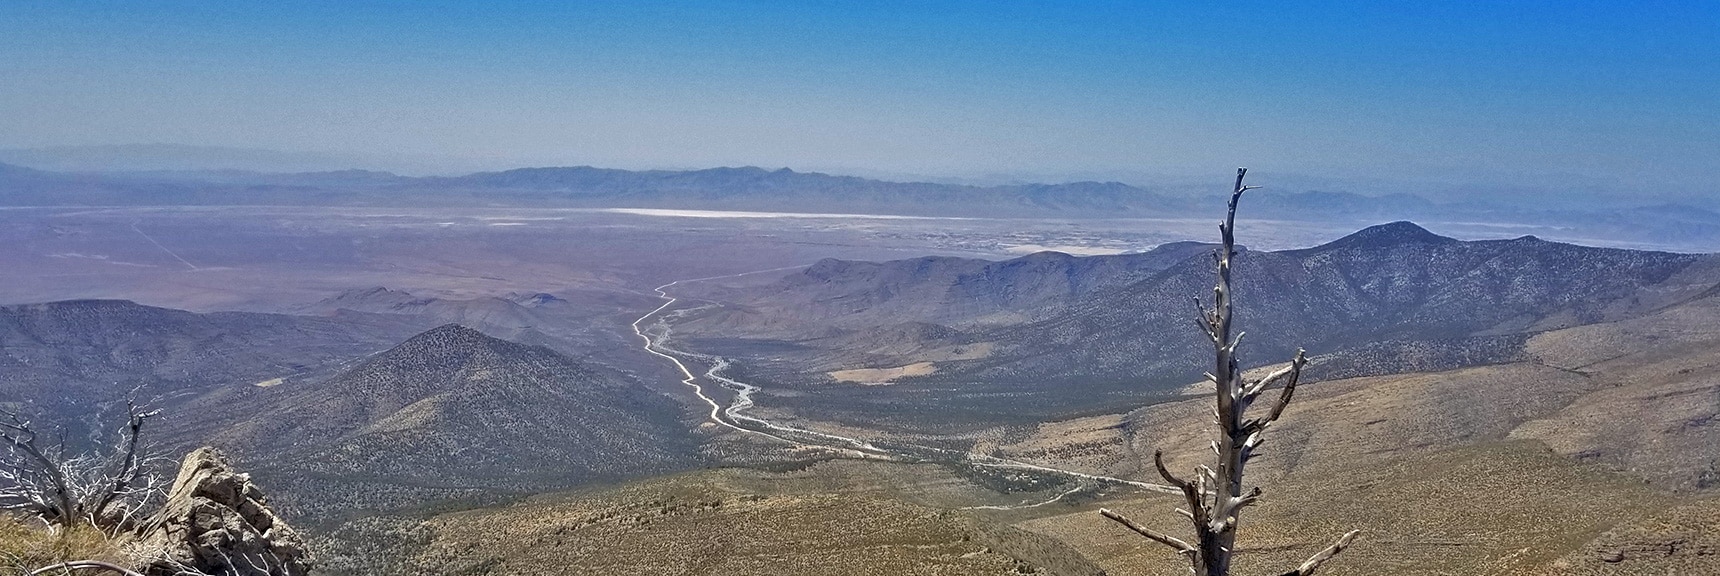 Trout Canyon, Pahrump and Funeral Mountains Viewed from 9,000ft on Sexton Ridge | Griffith Peak Southern Approach from Sexton Ridge Above Lovell Canyon, Nevada